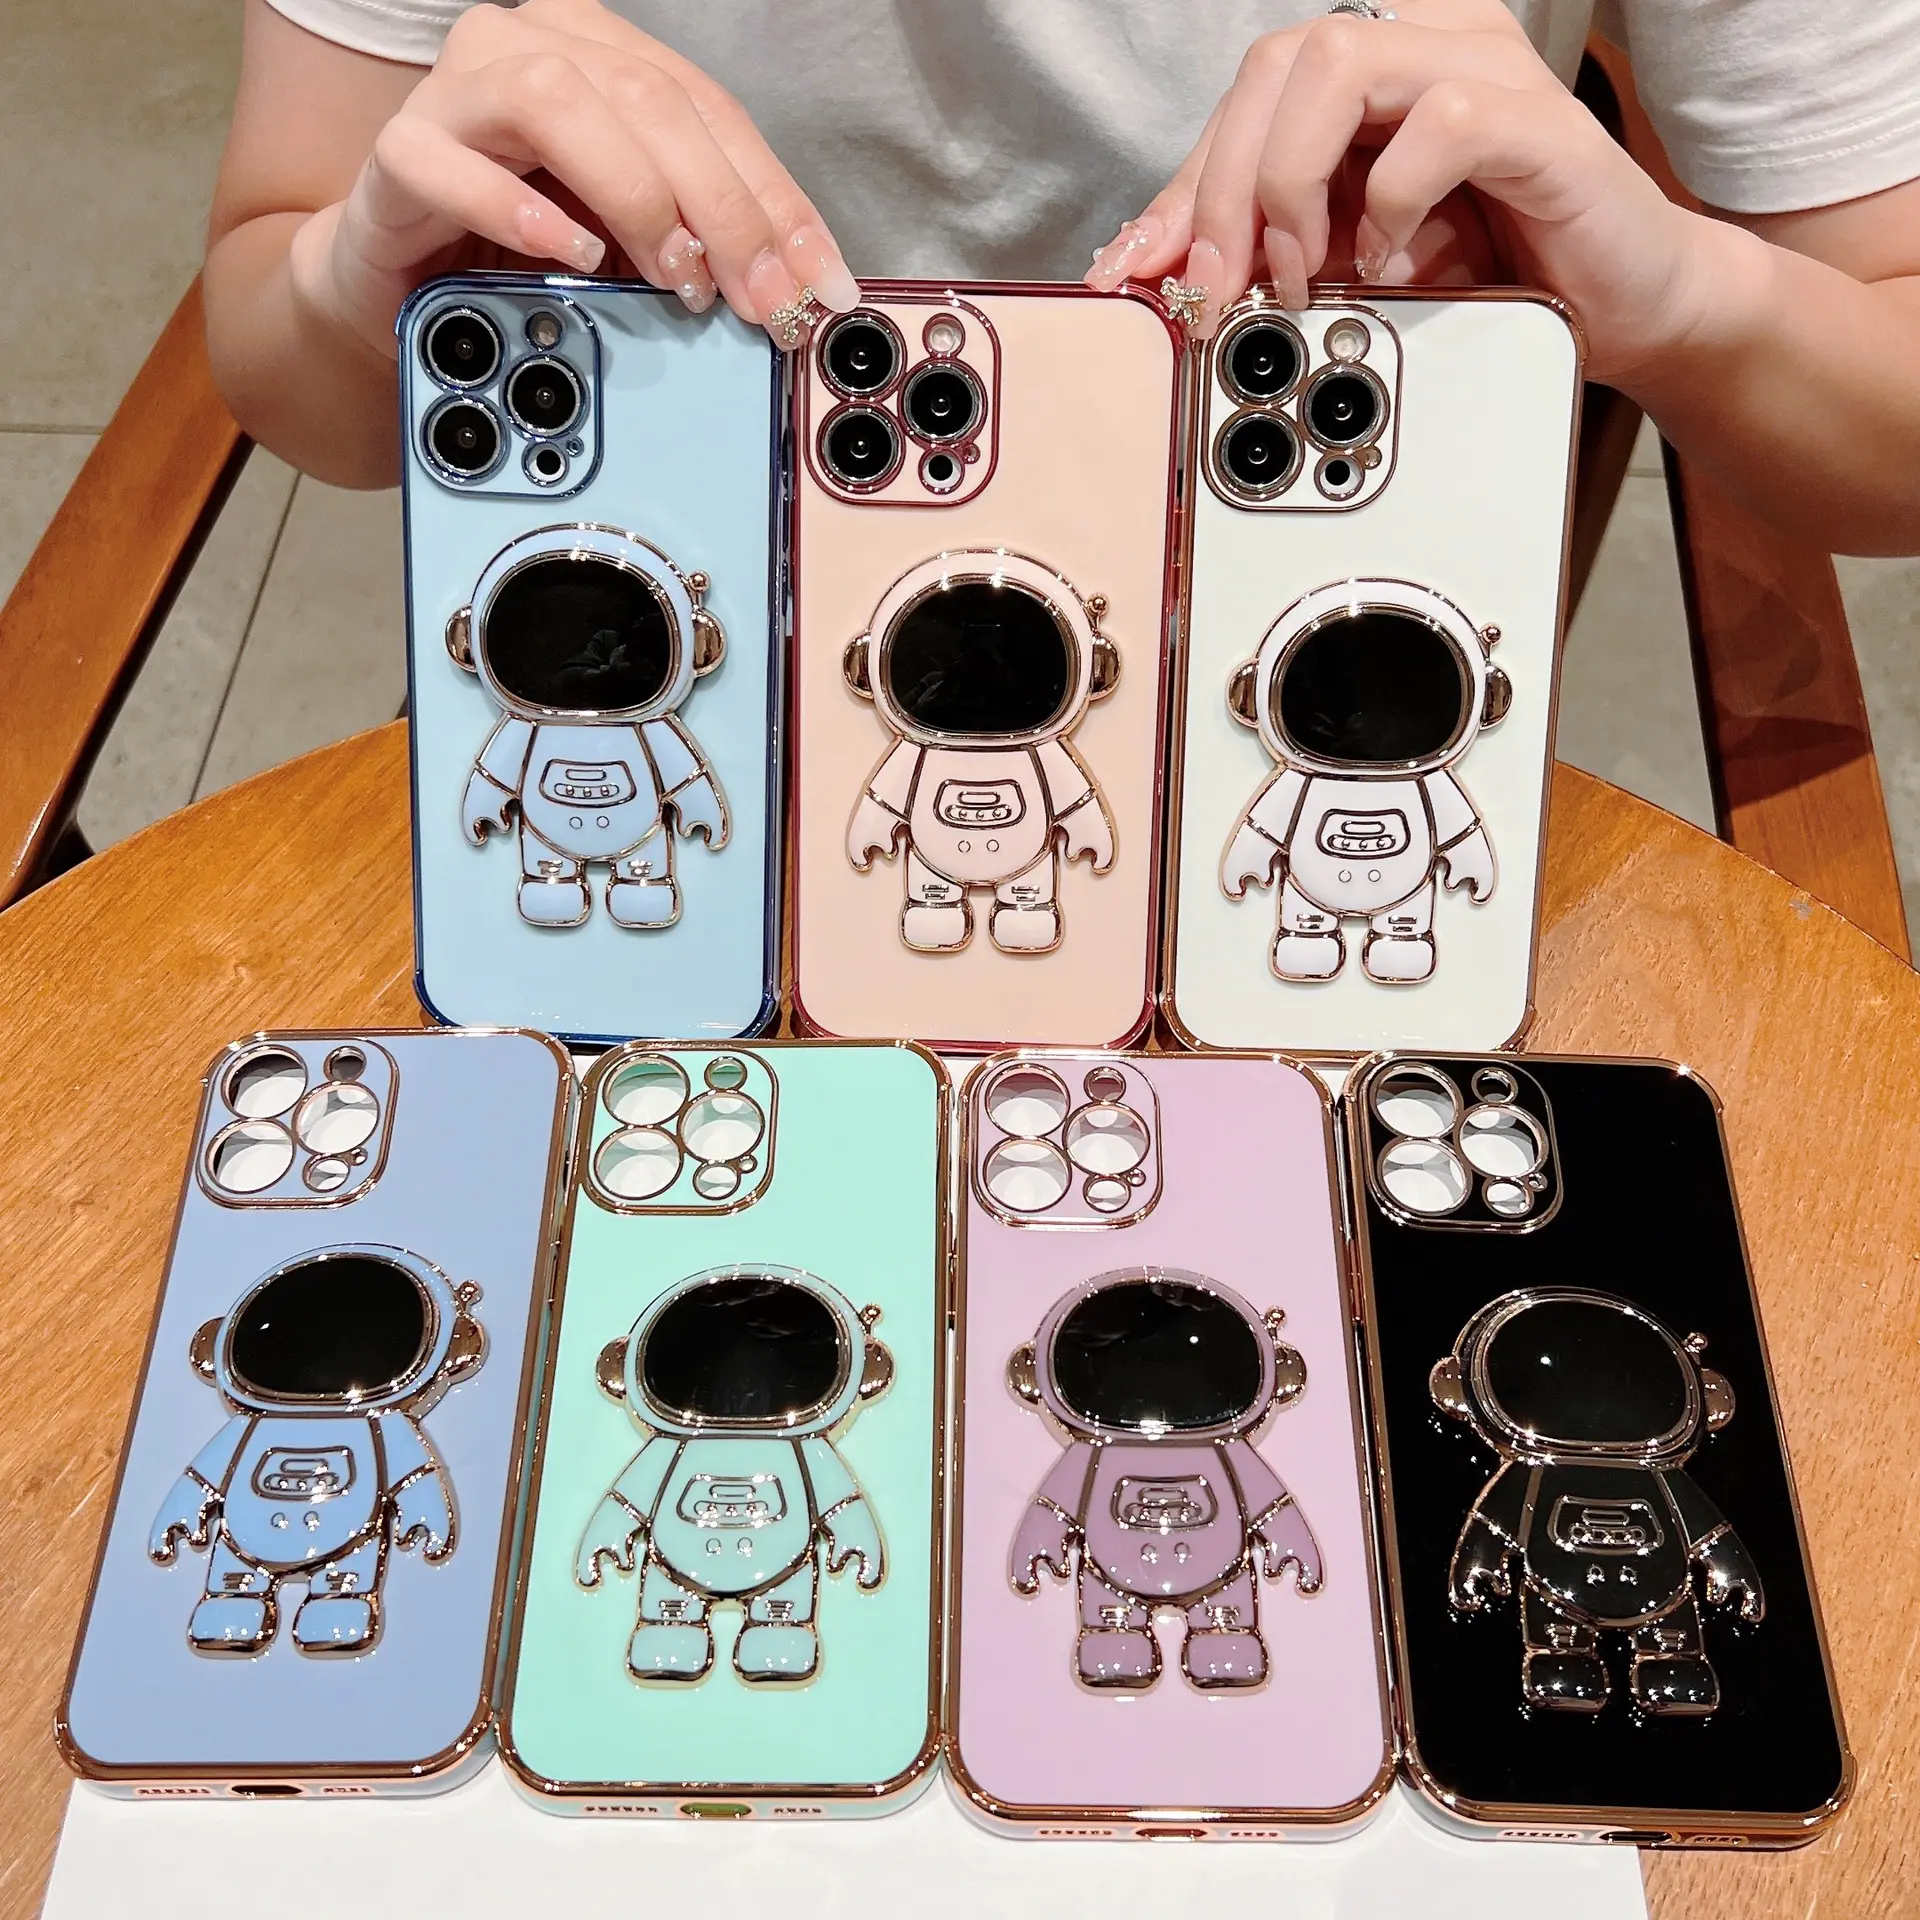 Smart Multifunctional Colorful Phone Cover Case for vivo y53s y33 x27 v15 pro y30 y20i